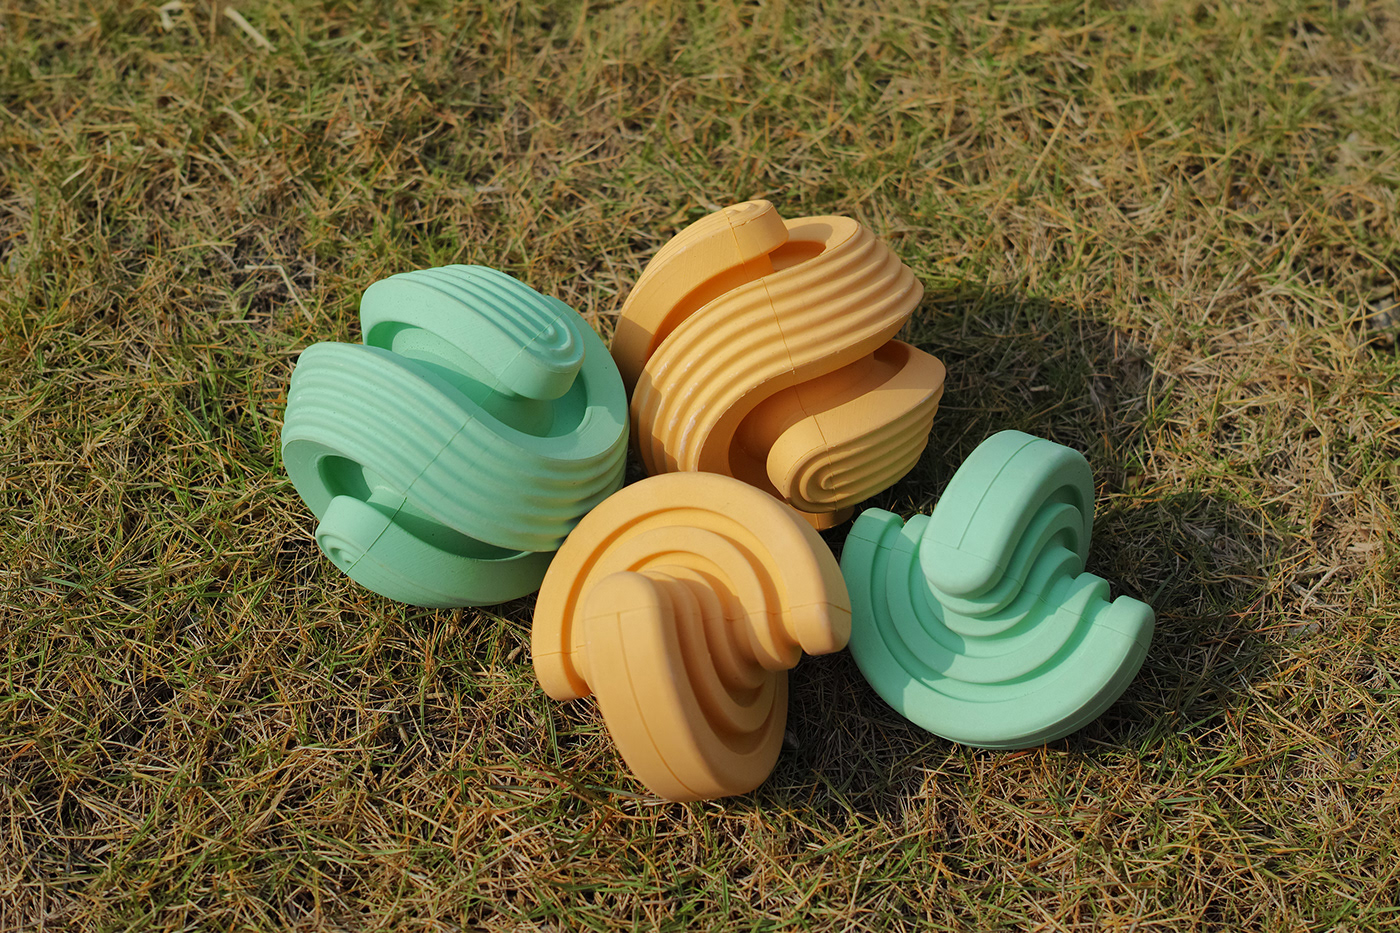 industrial design  product design  Pet dog toy rubber play